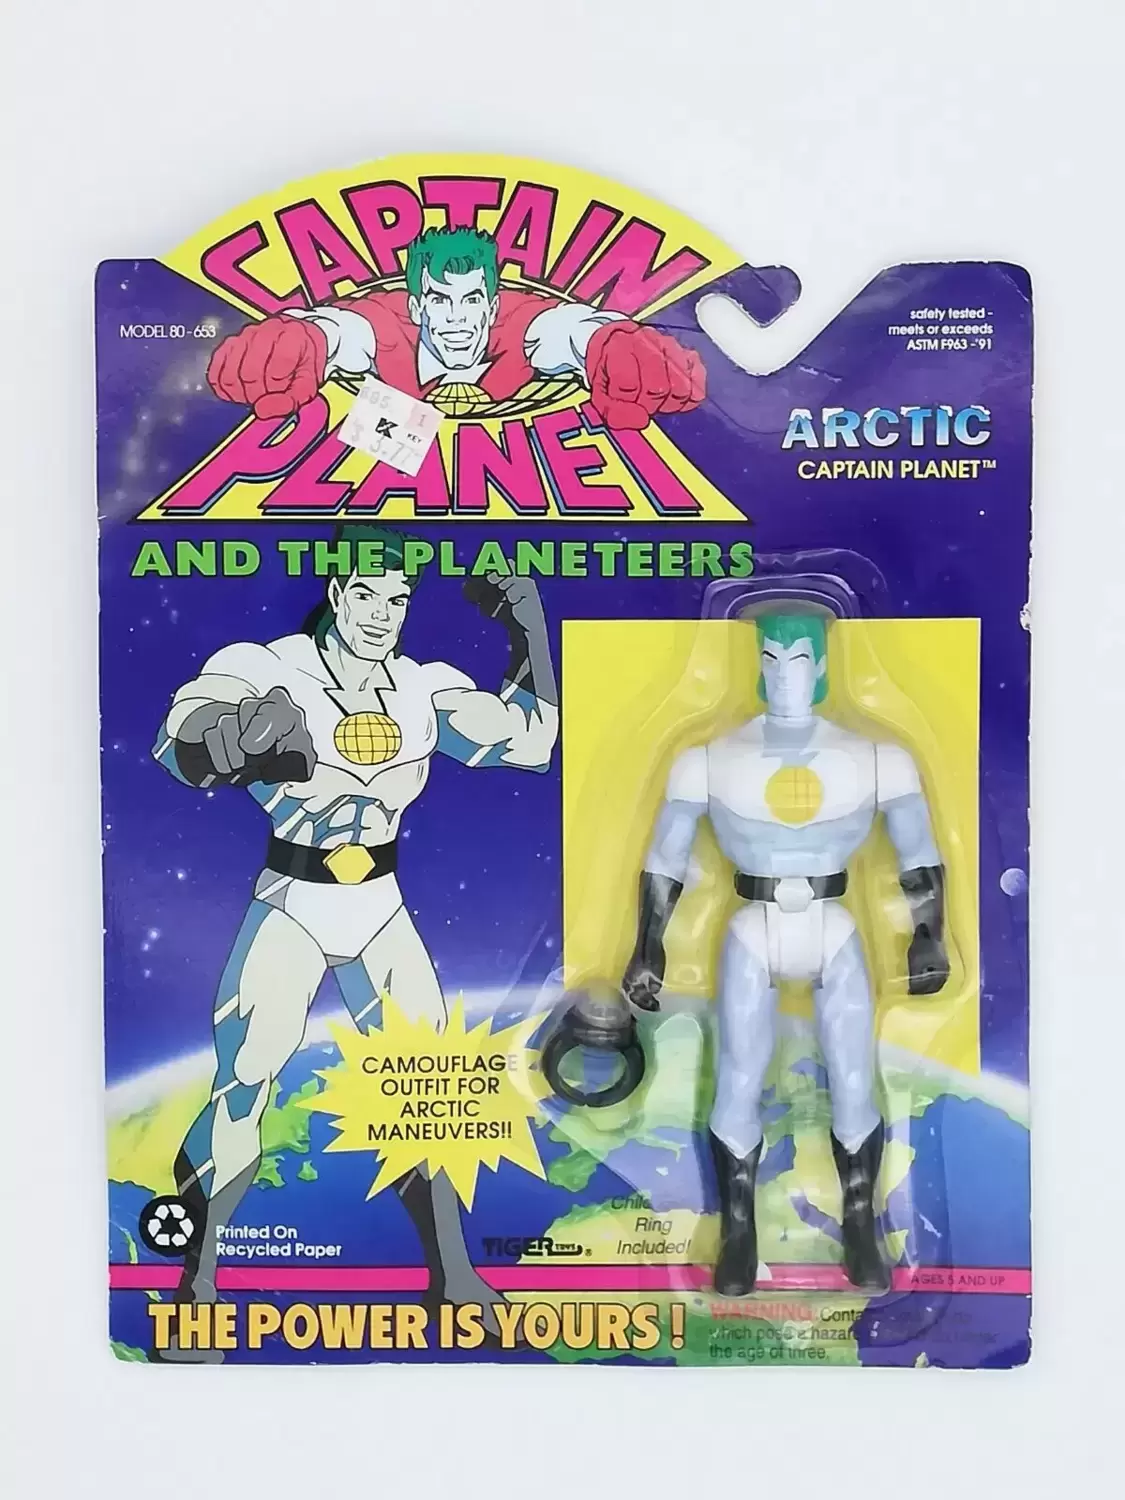 Arctic Captain Planet - Captain Planet and the Planeteers action